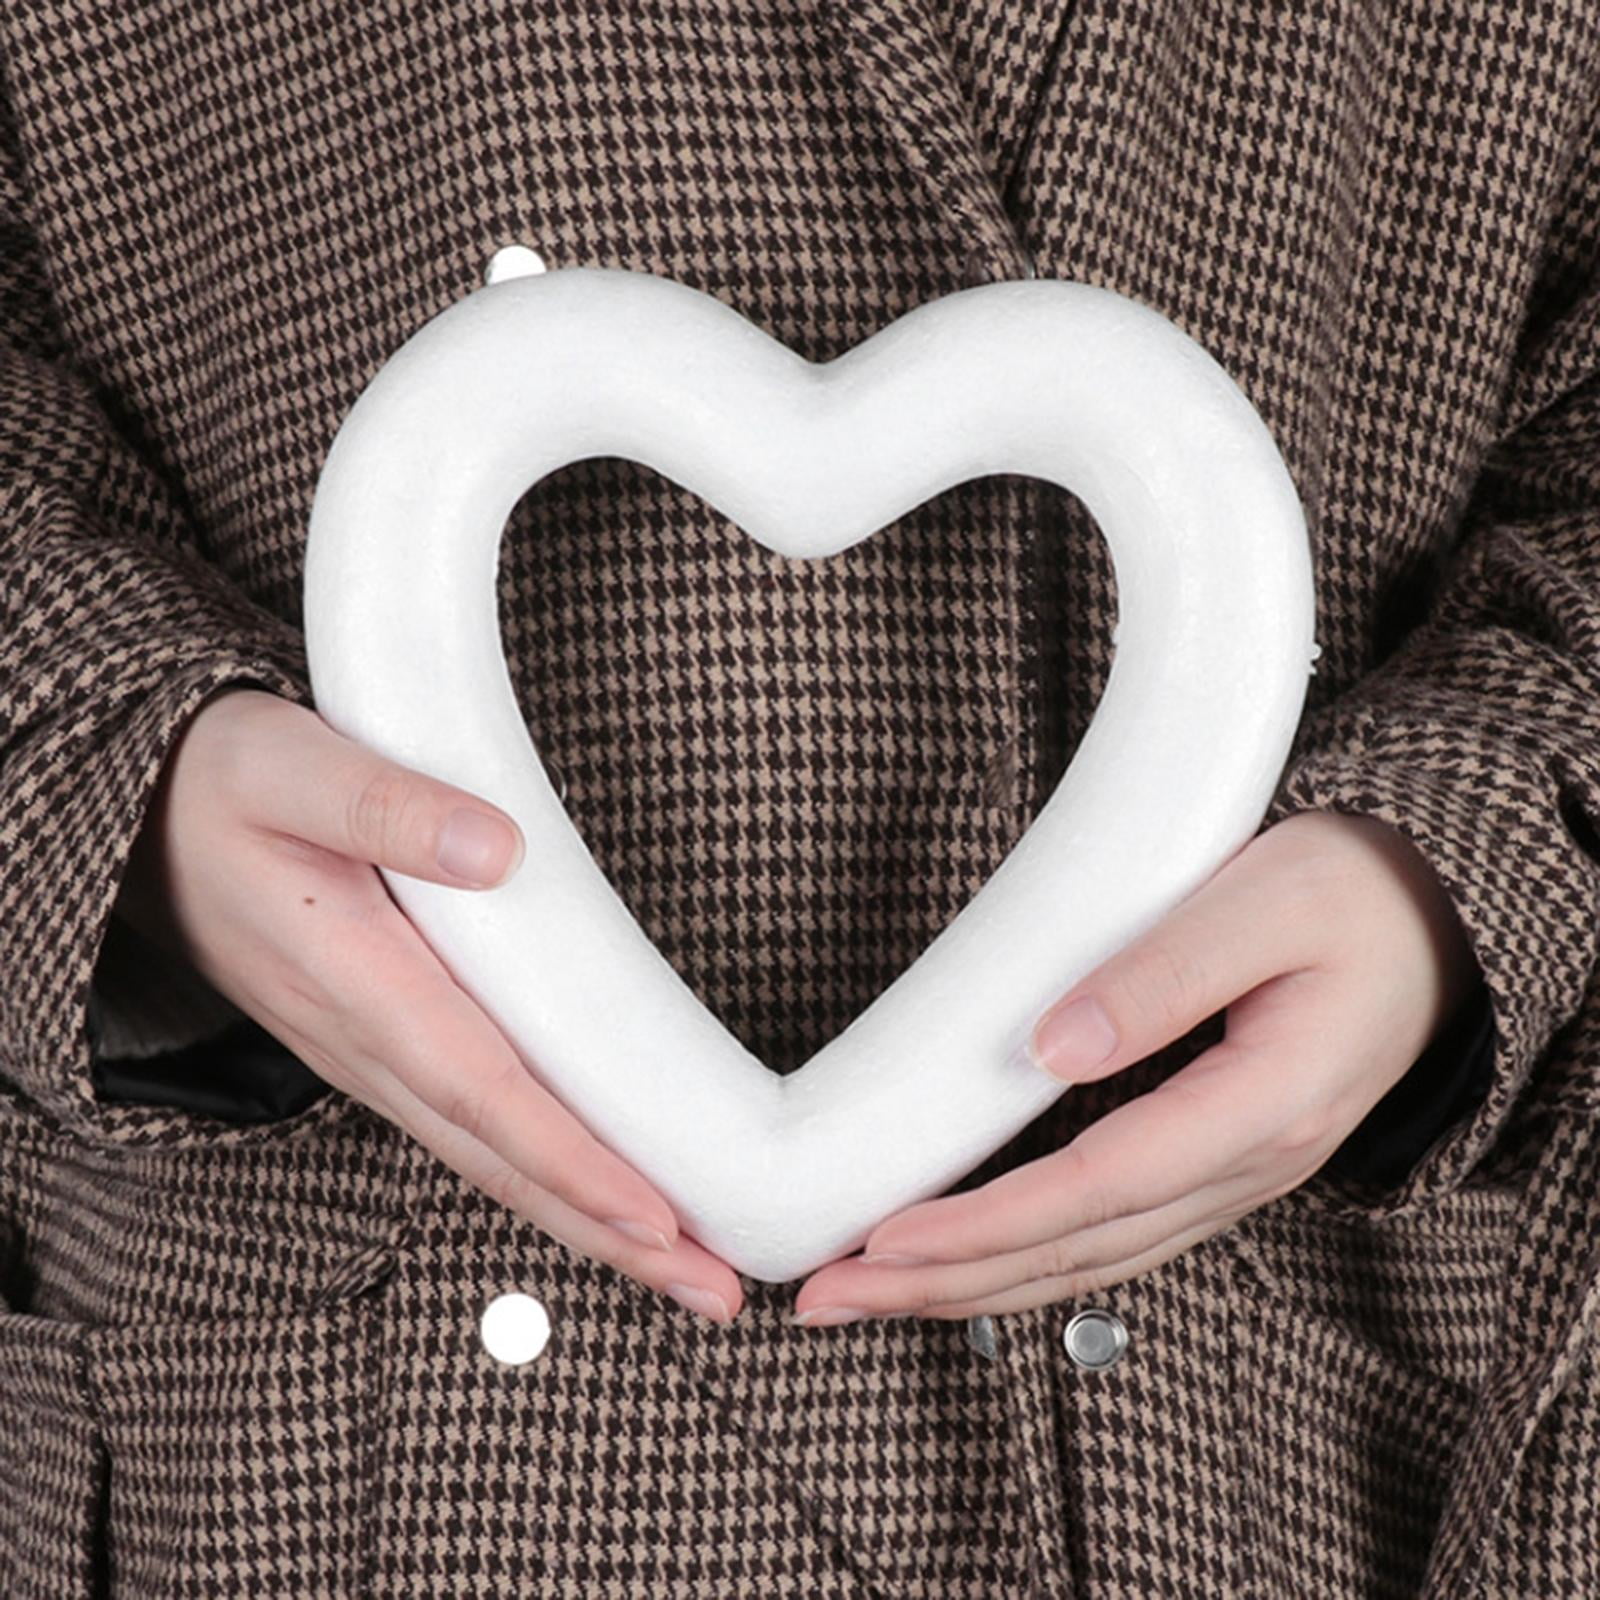  Heart Shaped Foam, 16 PCS Wreath Foam Hearts for Crafts White  Foam Heart Wreath for DIY Artifacts Versatile Hearts for Wedding  Decorations, Valentines Day Accessories : Home & Kitchen